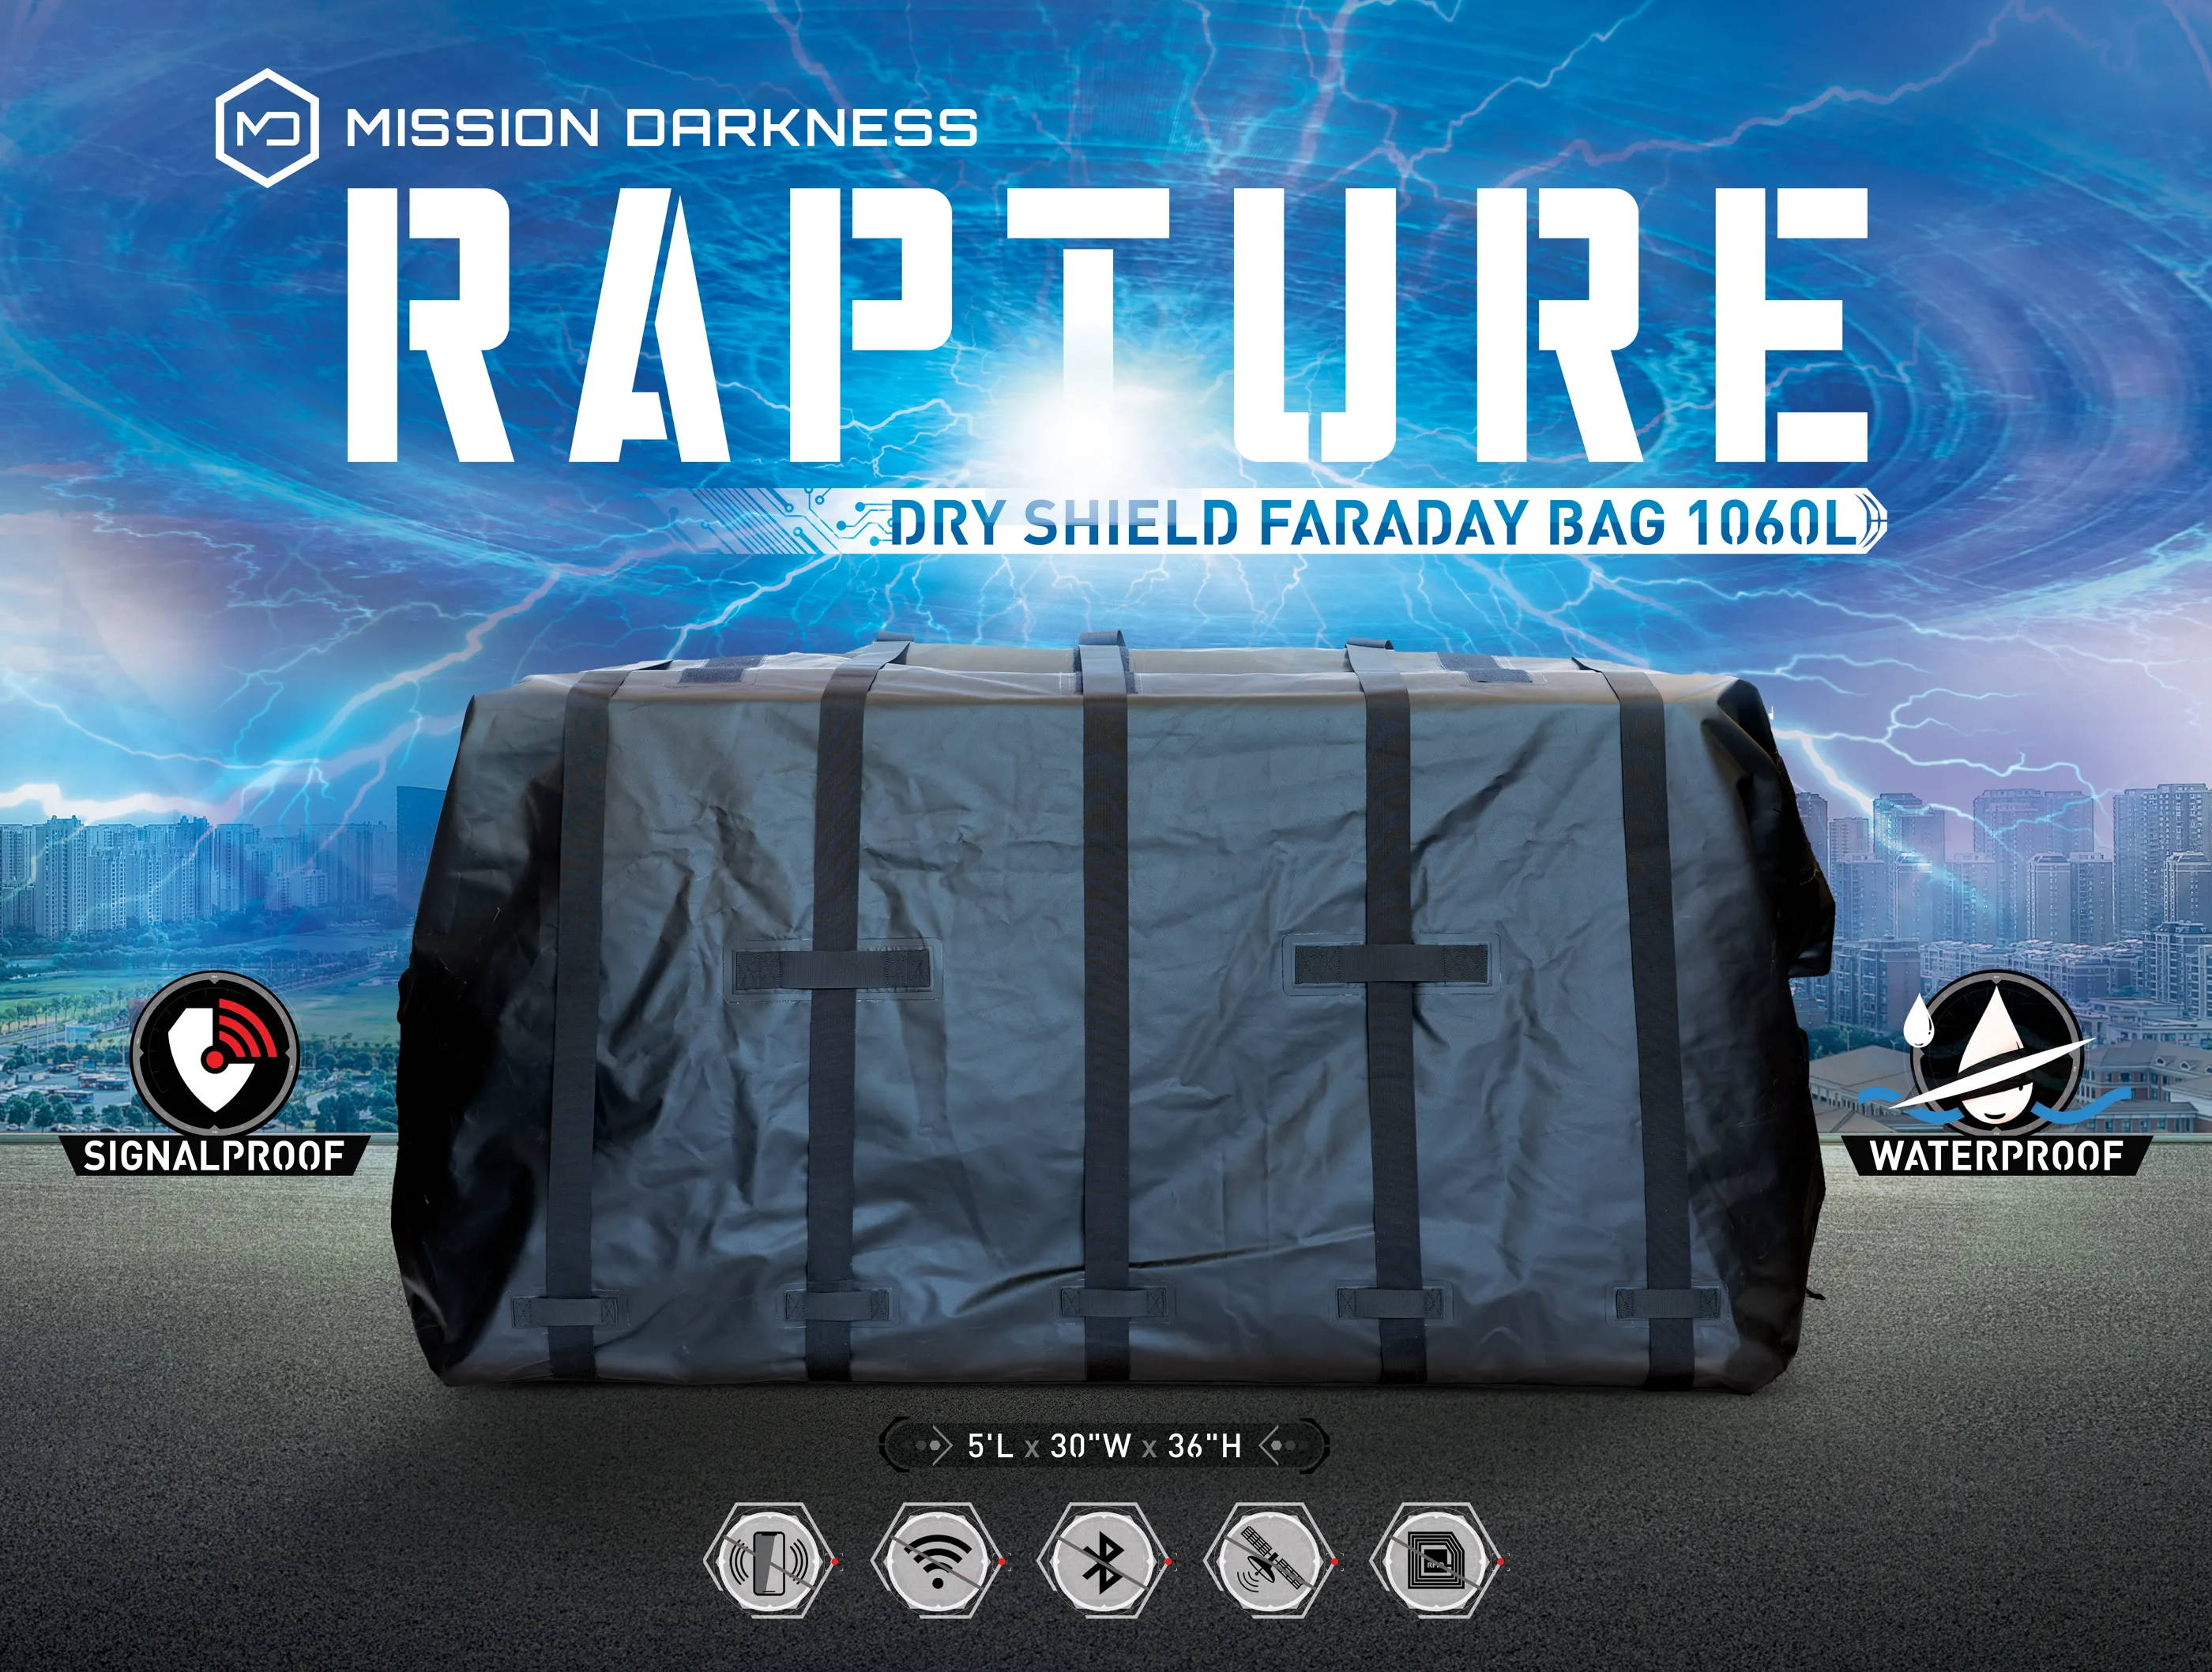 Mission Darkness Limited Edition Faraday Hat Bundle - Includes 1 EMF  Blackout Hat and 1 Phone Shield Faraday Bag - Unique RF Shielding Gift  Package